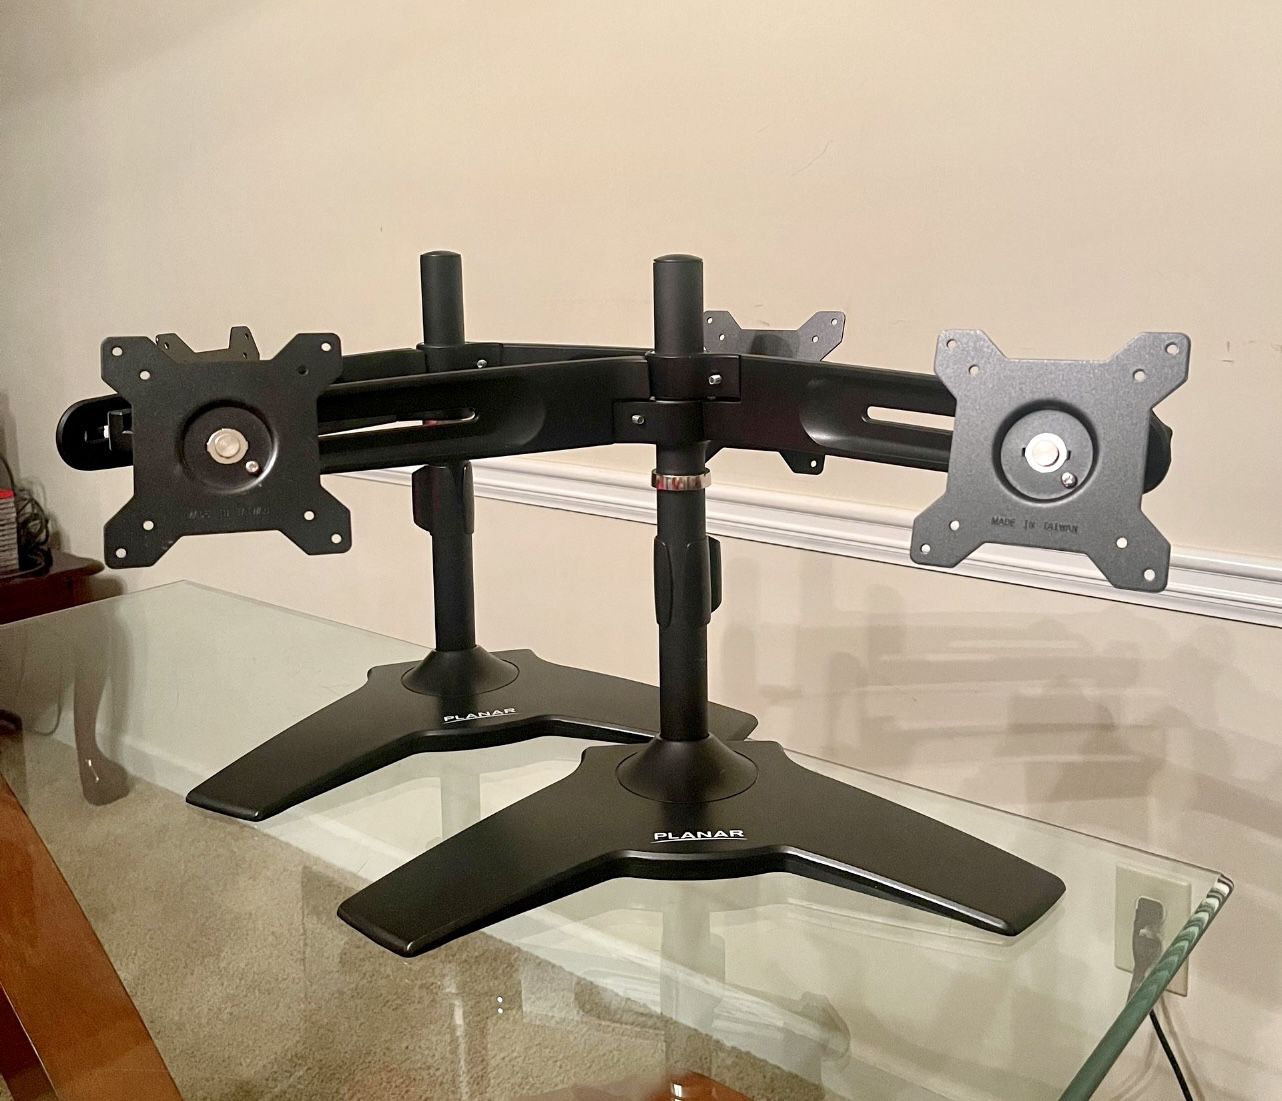 Like new Stand Planar Arm.. For two monitors of 15-24 inches each. $40  Each One 